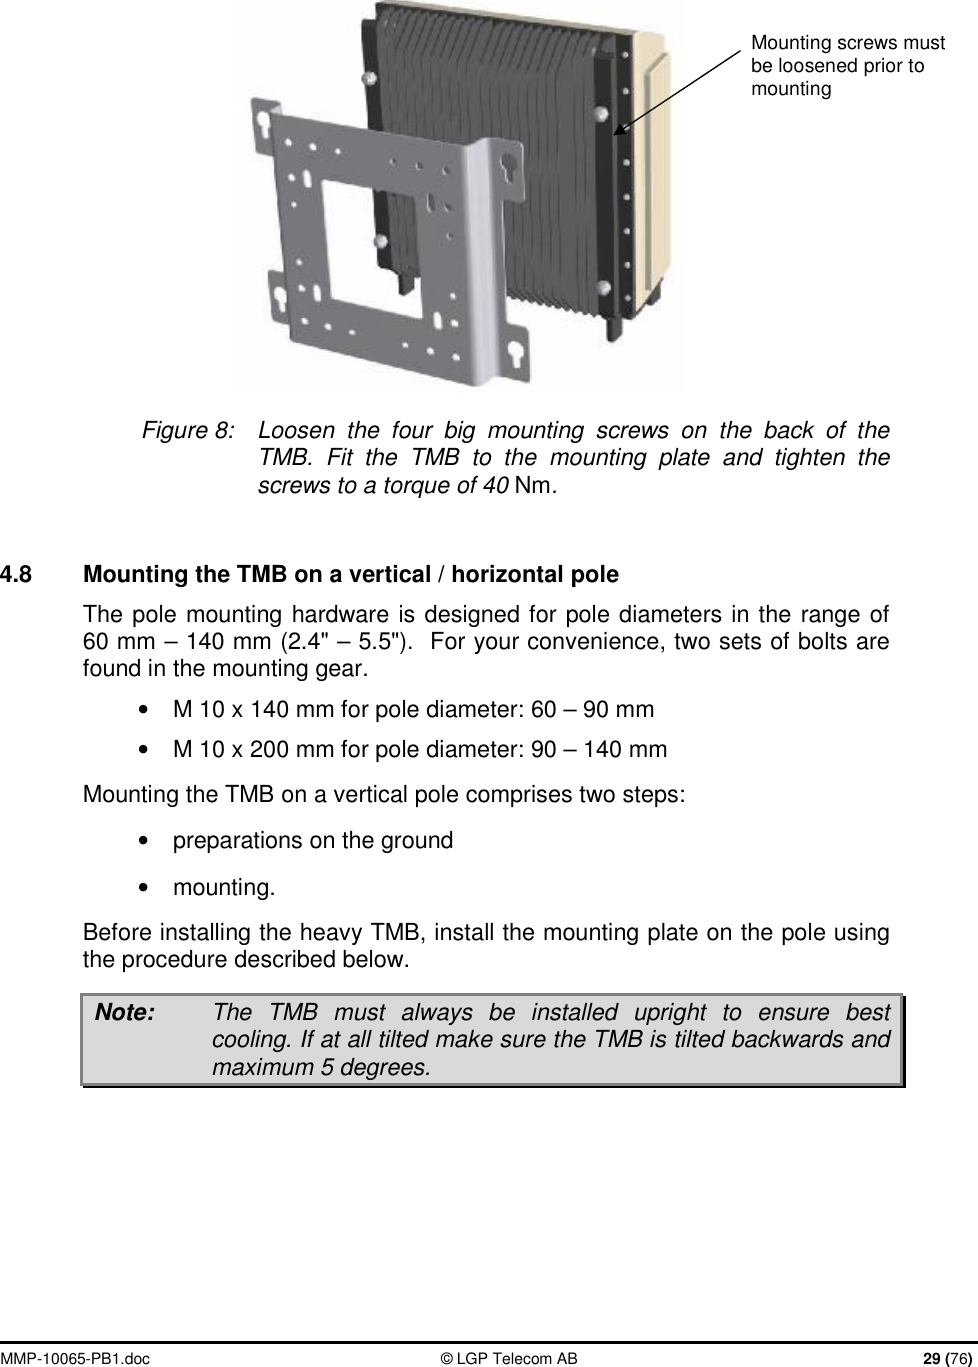  MMP-10065-PB1.doc  © LGP Telecom AB  29 (76)   Figure 8:  Loosen the four big mounting screws on the back of the TMB.  Fit the TMB to the mounting plate and tighten the screws to a torque of 40 Nm.  4.8  Mounting the TMB on a vertical / horizontal pole The pole mounting hardware is designed for pole diameters in the range of 60 mm – 140 mm (2.4&quot; – 5.5&quot;).  For your convenience, two sets of bolts are found in the mounting gear. • M 10 x 140 mm for pole diameter: 60 – 90 mm • M 10 x 200 mm for pole diameter: 90 – 140 mm Mounting the TMB on a vertical pole comprises two steps:  •  preparations on the ground  •  mounting.  Before installing the heavy TMB, install the mounting plate on the pole using the procedure described below.  Note:  The TMB must always be installed upright to ensure best cooling. If at all tilted make sure the TMB is tilted backwards and maximum 5 degrees.  Mounting screws must be loosened prior to mounting 